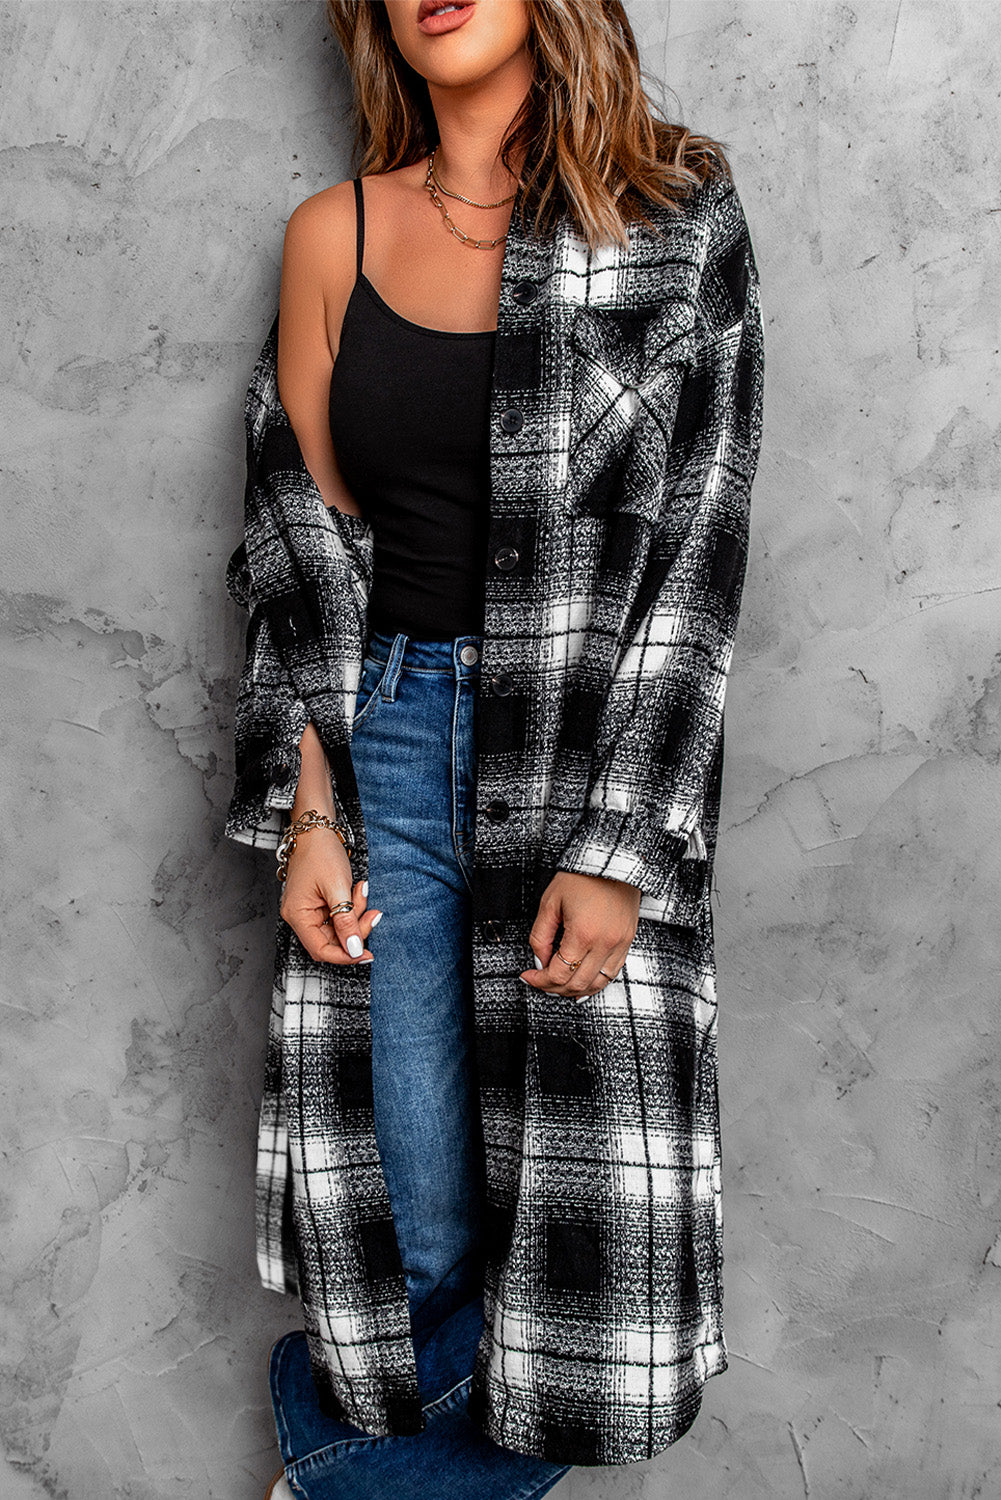 Black Plaid Print Buttoned Pocketed Long Sleeve Long Coat